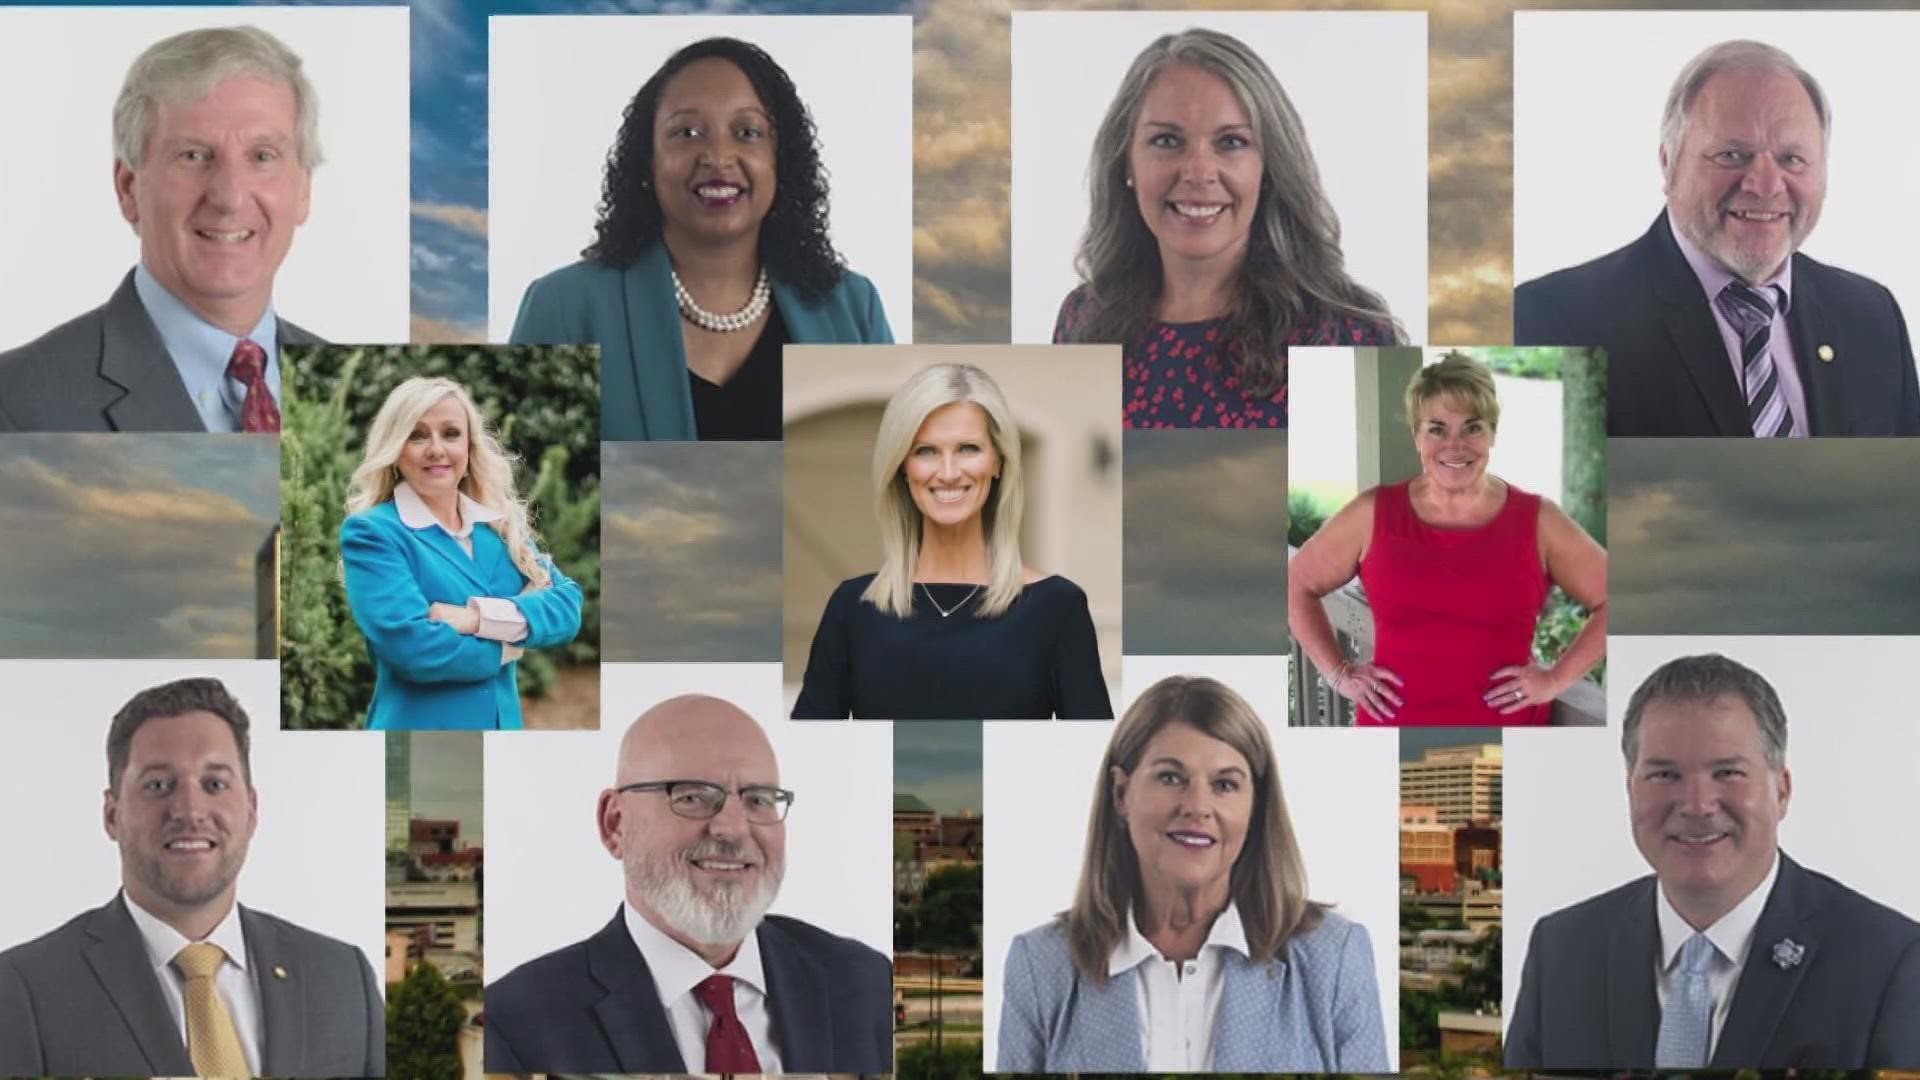 The Knox County Board of Education, County Commission and Knoxville City Council are all female-dominated.